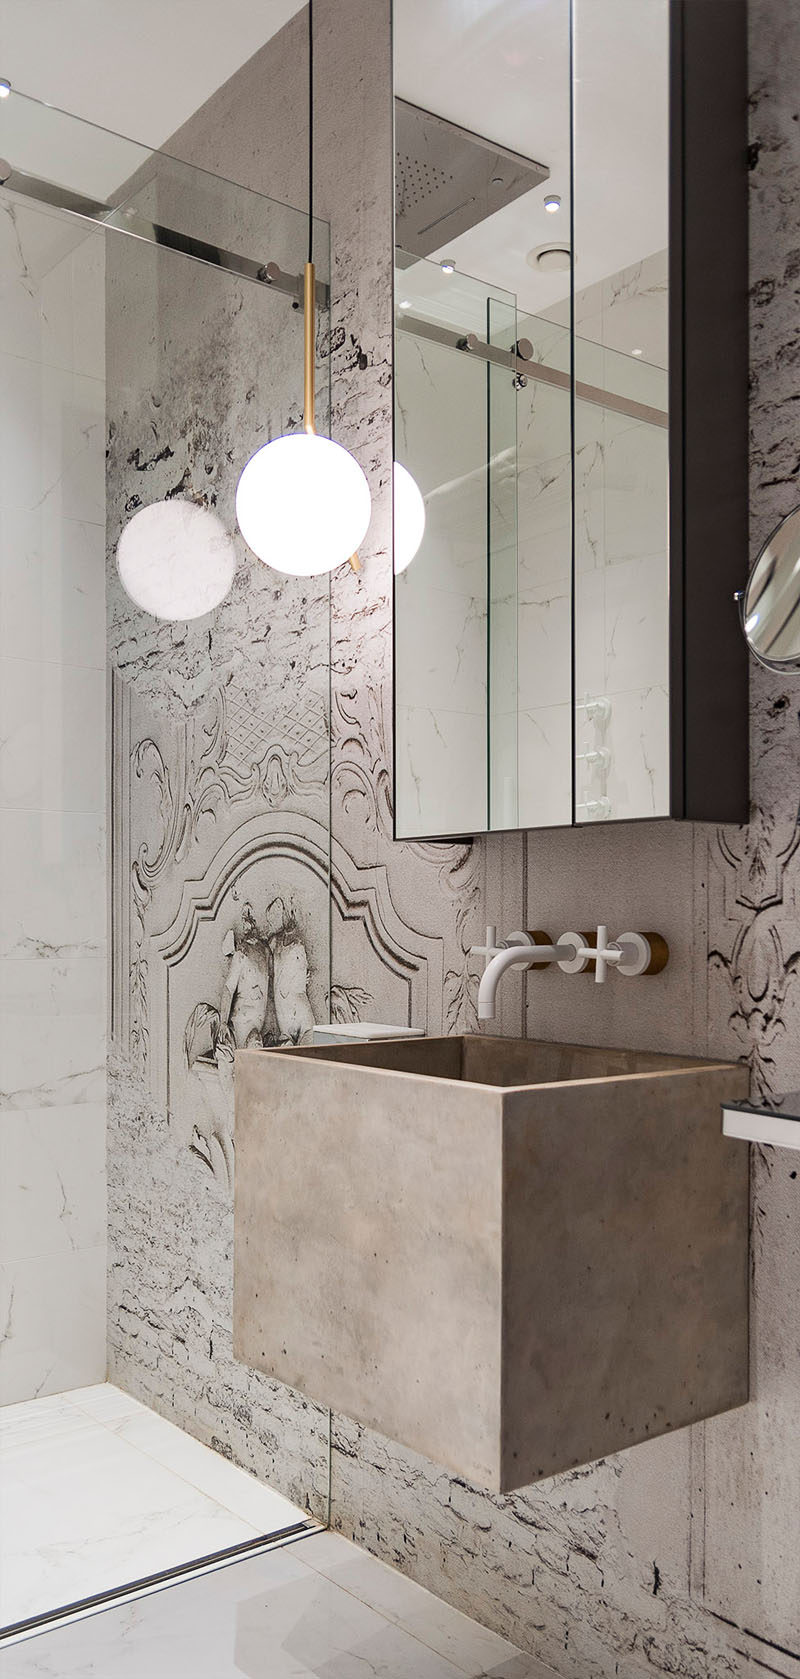 In this bathroom, a deep concrete sink appears to float and a glass shower door allows the mural to carry on uninterrupted into the shower.